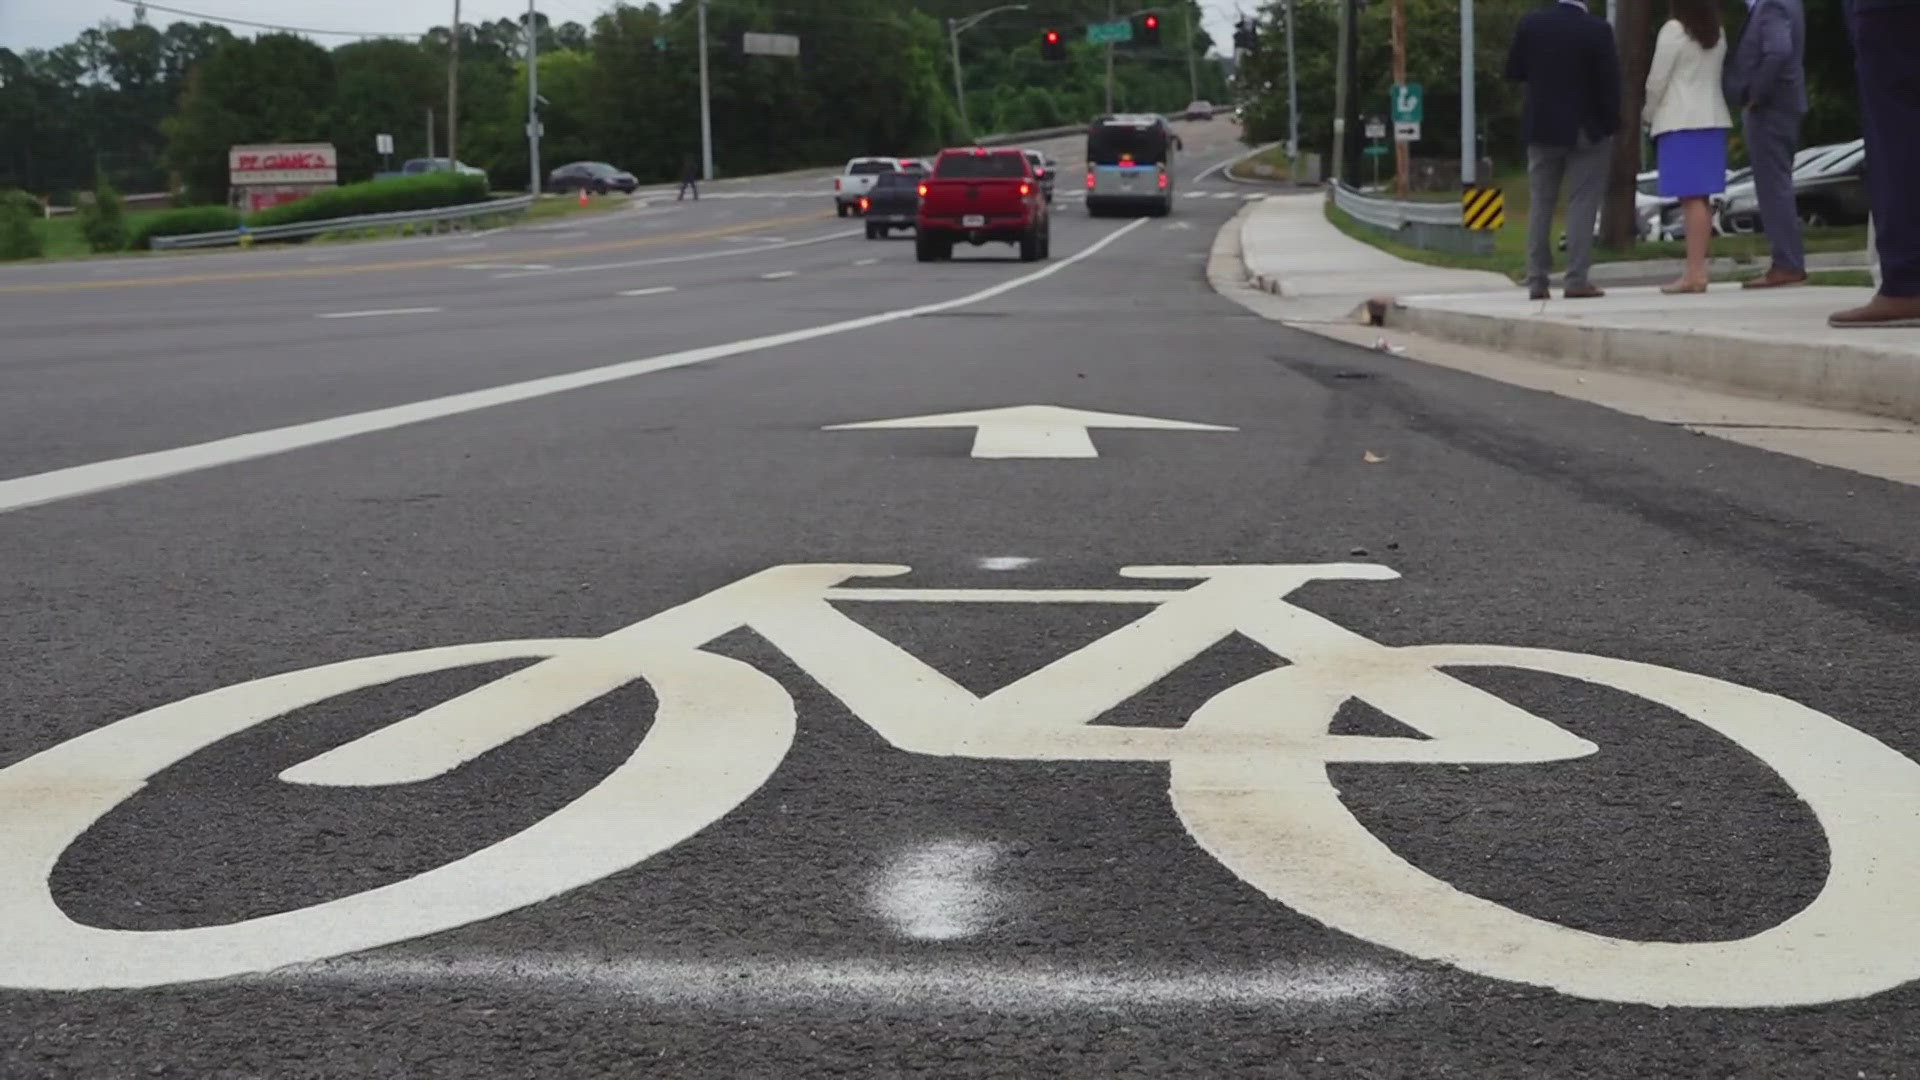 The $2.3 million project aims to make part of Kingston Pike safer for bikers and pedestrians.